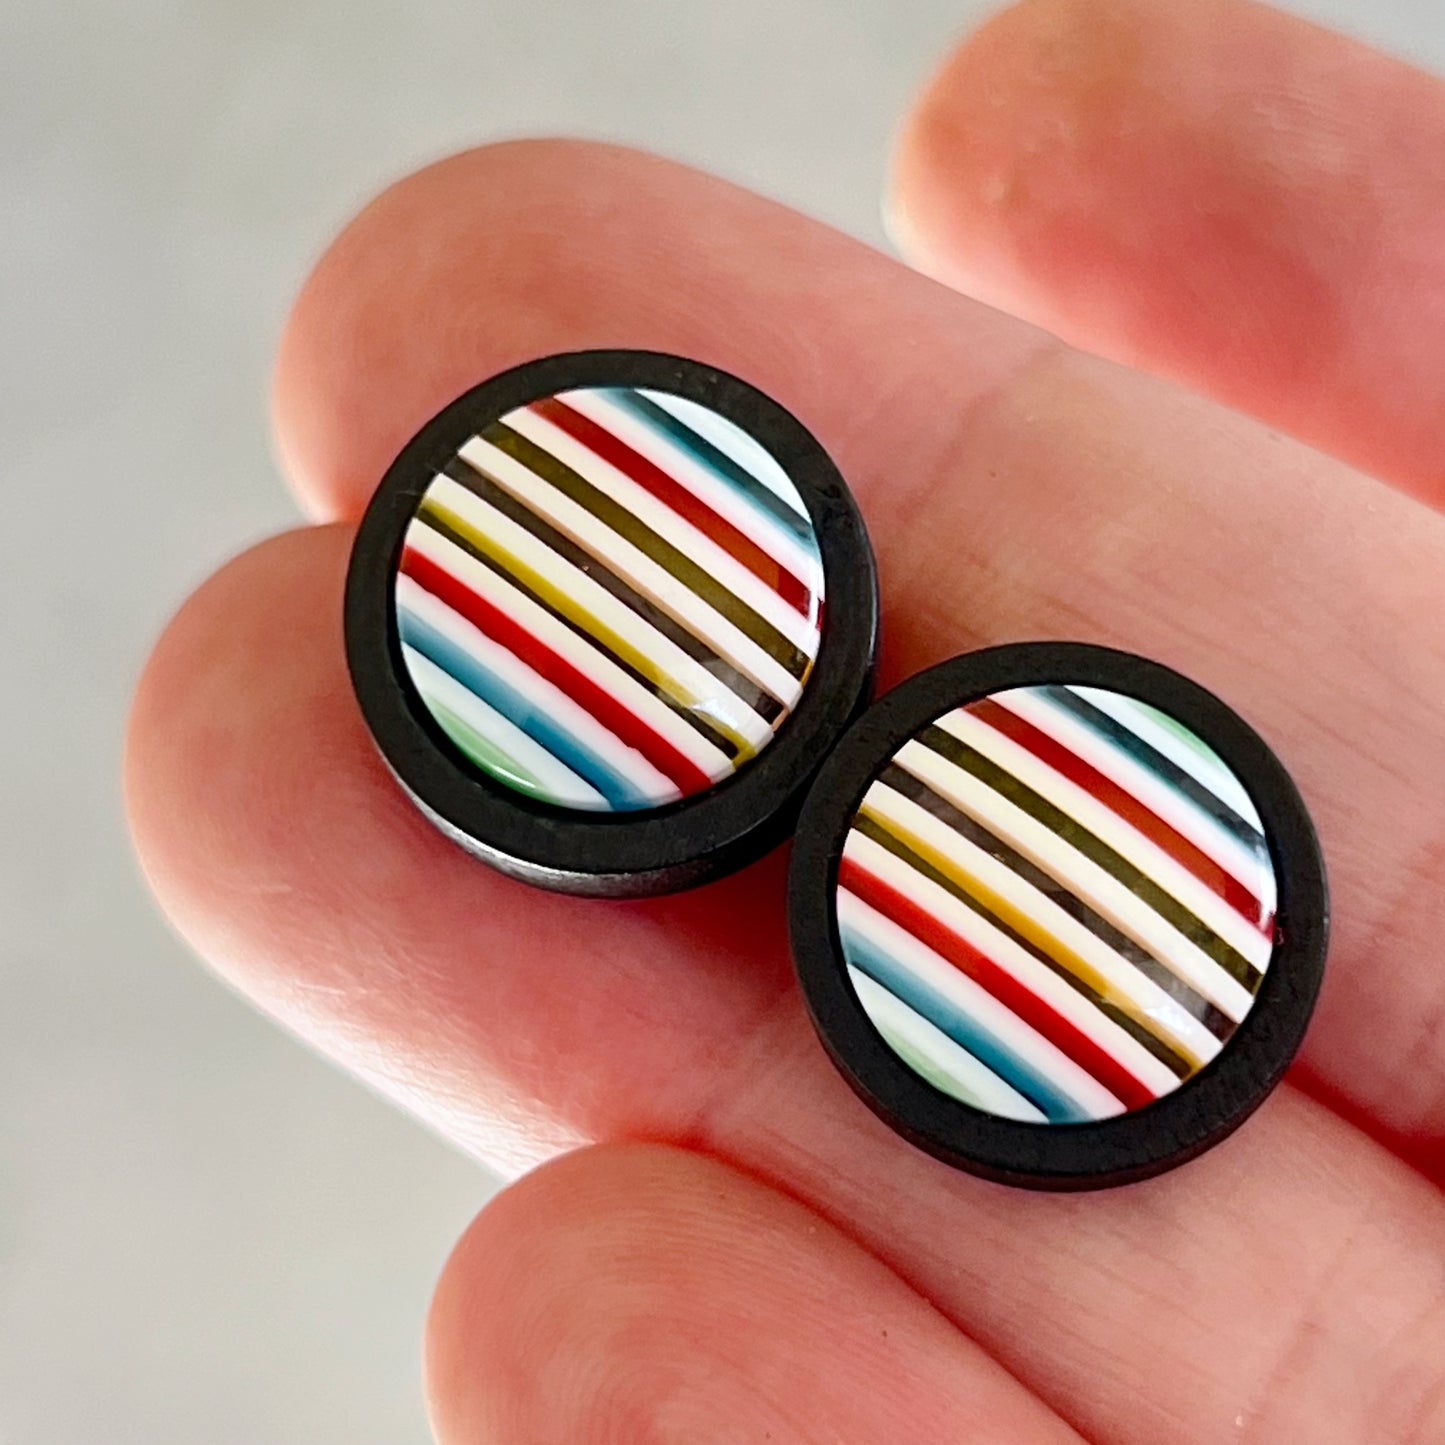 Blue, Red, Yellow Striped Black Wood Stud Earrings - Colorful and Unique Accessories